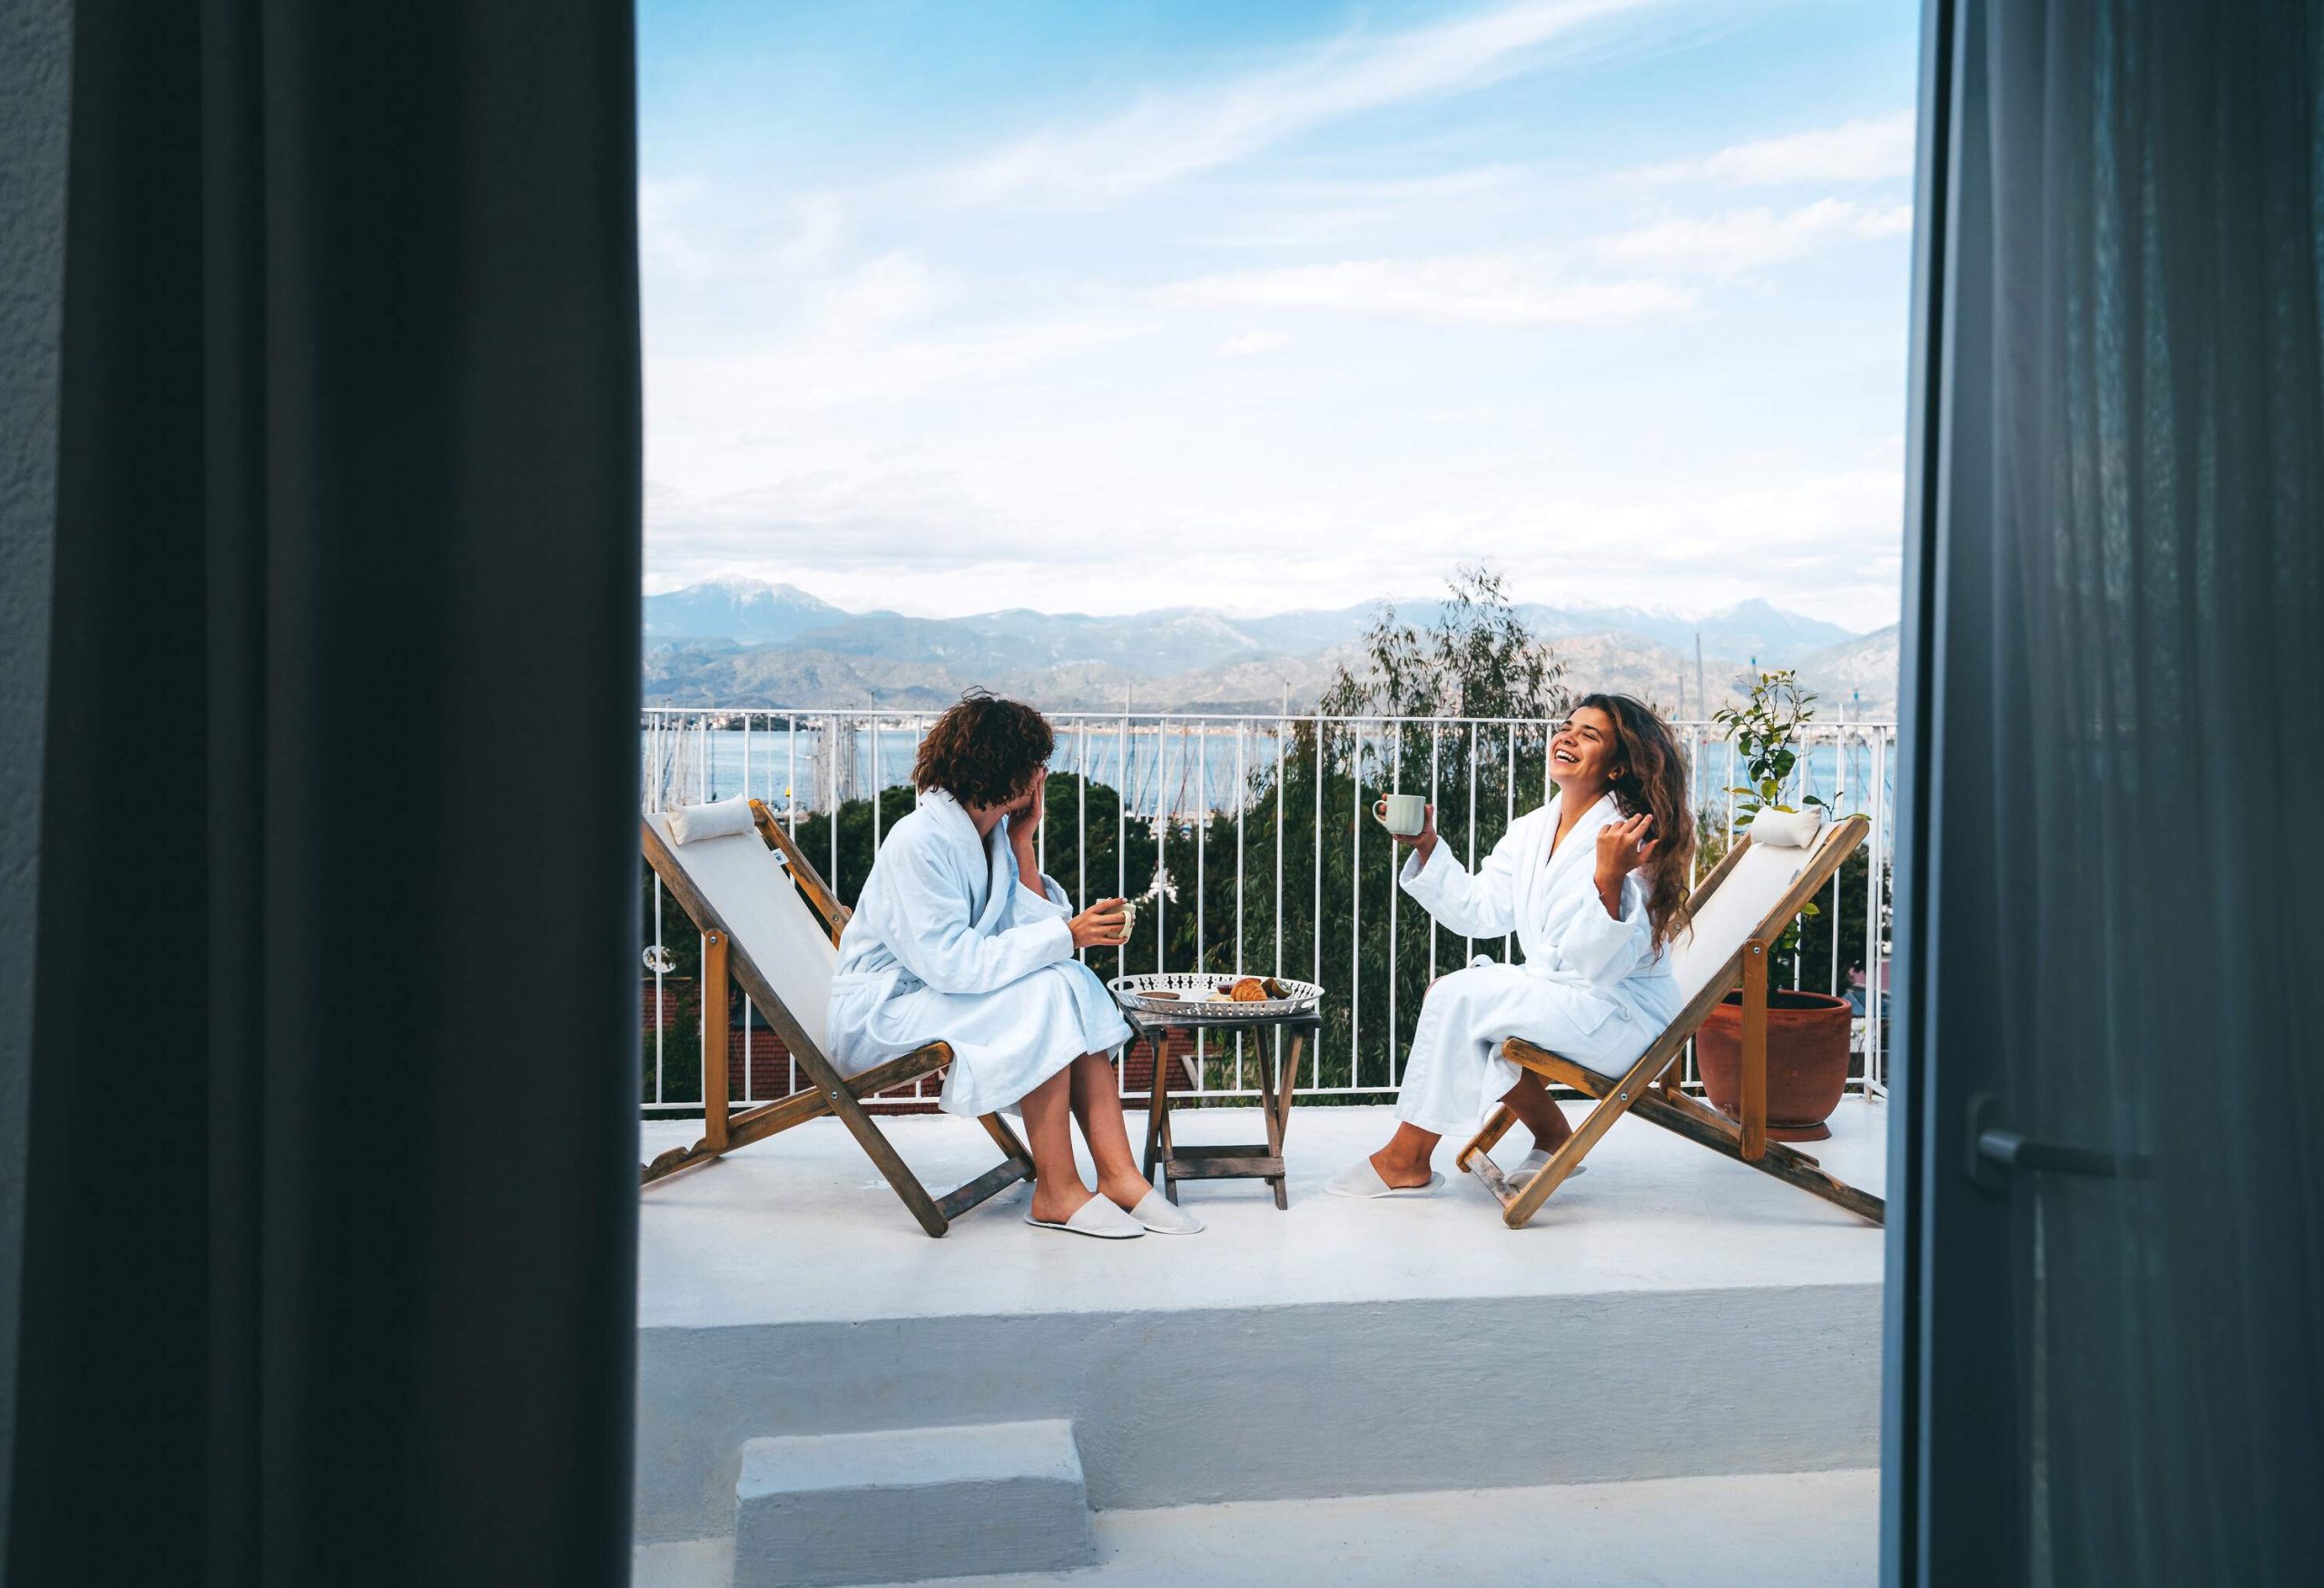 Two friends in SPA bathrobes having a good time drinking tea with the scenic view on the hotel room balcony. Bachelorette party, happiness when spending time together.